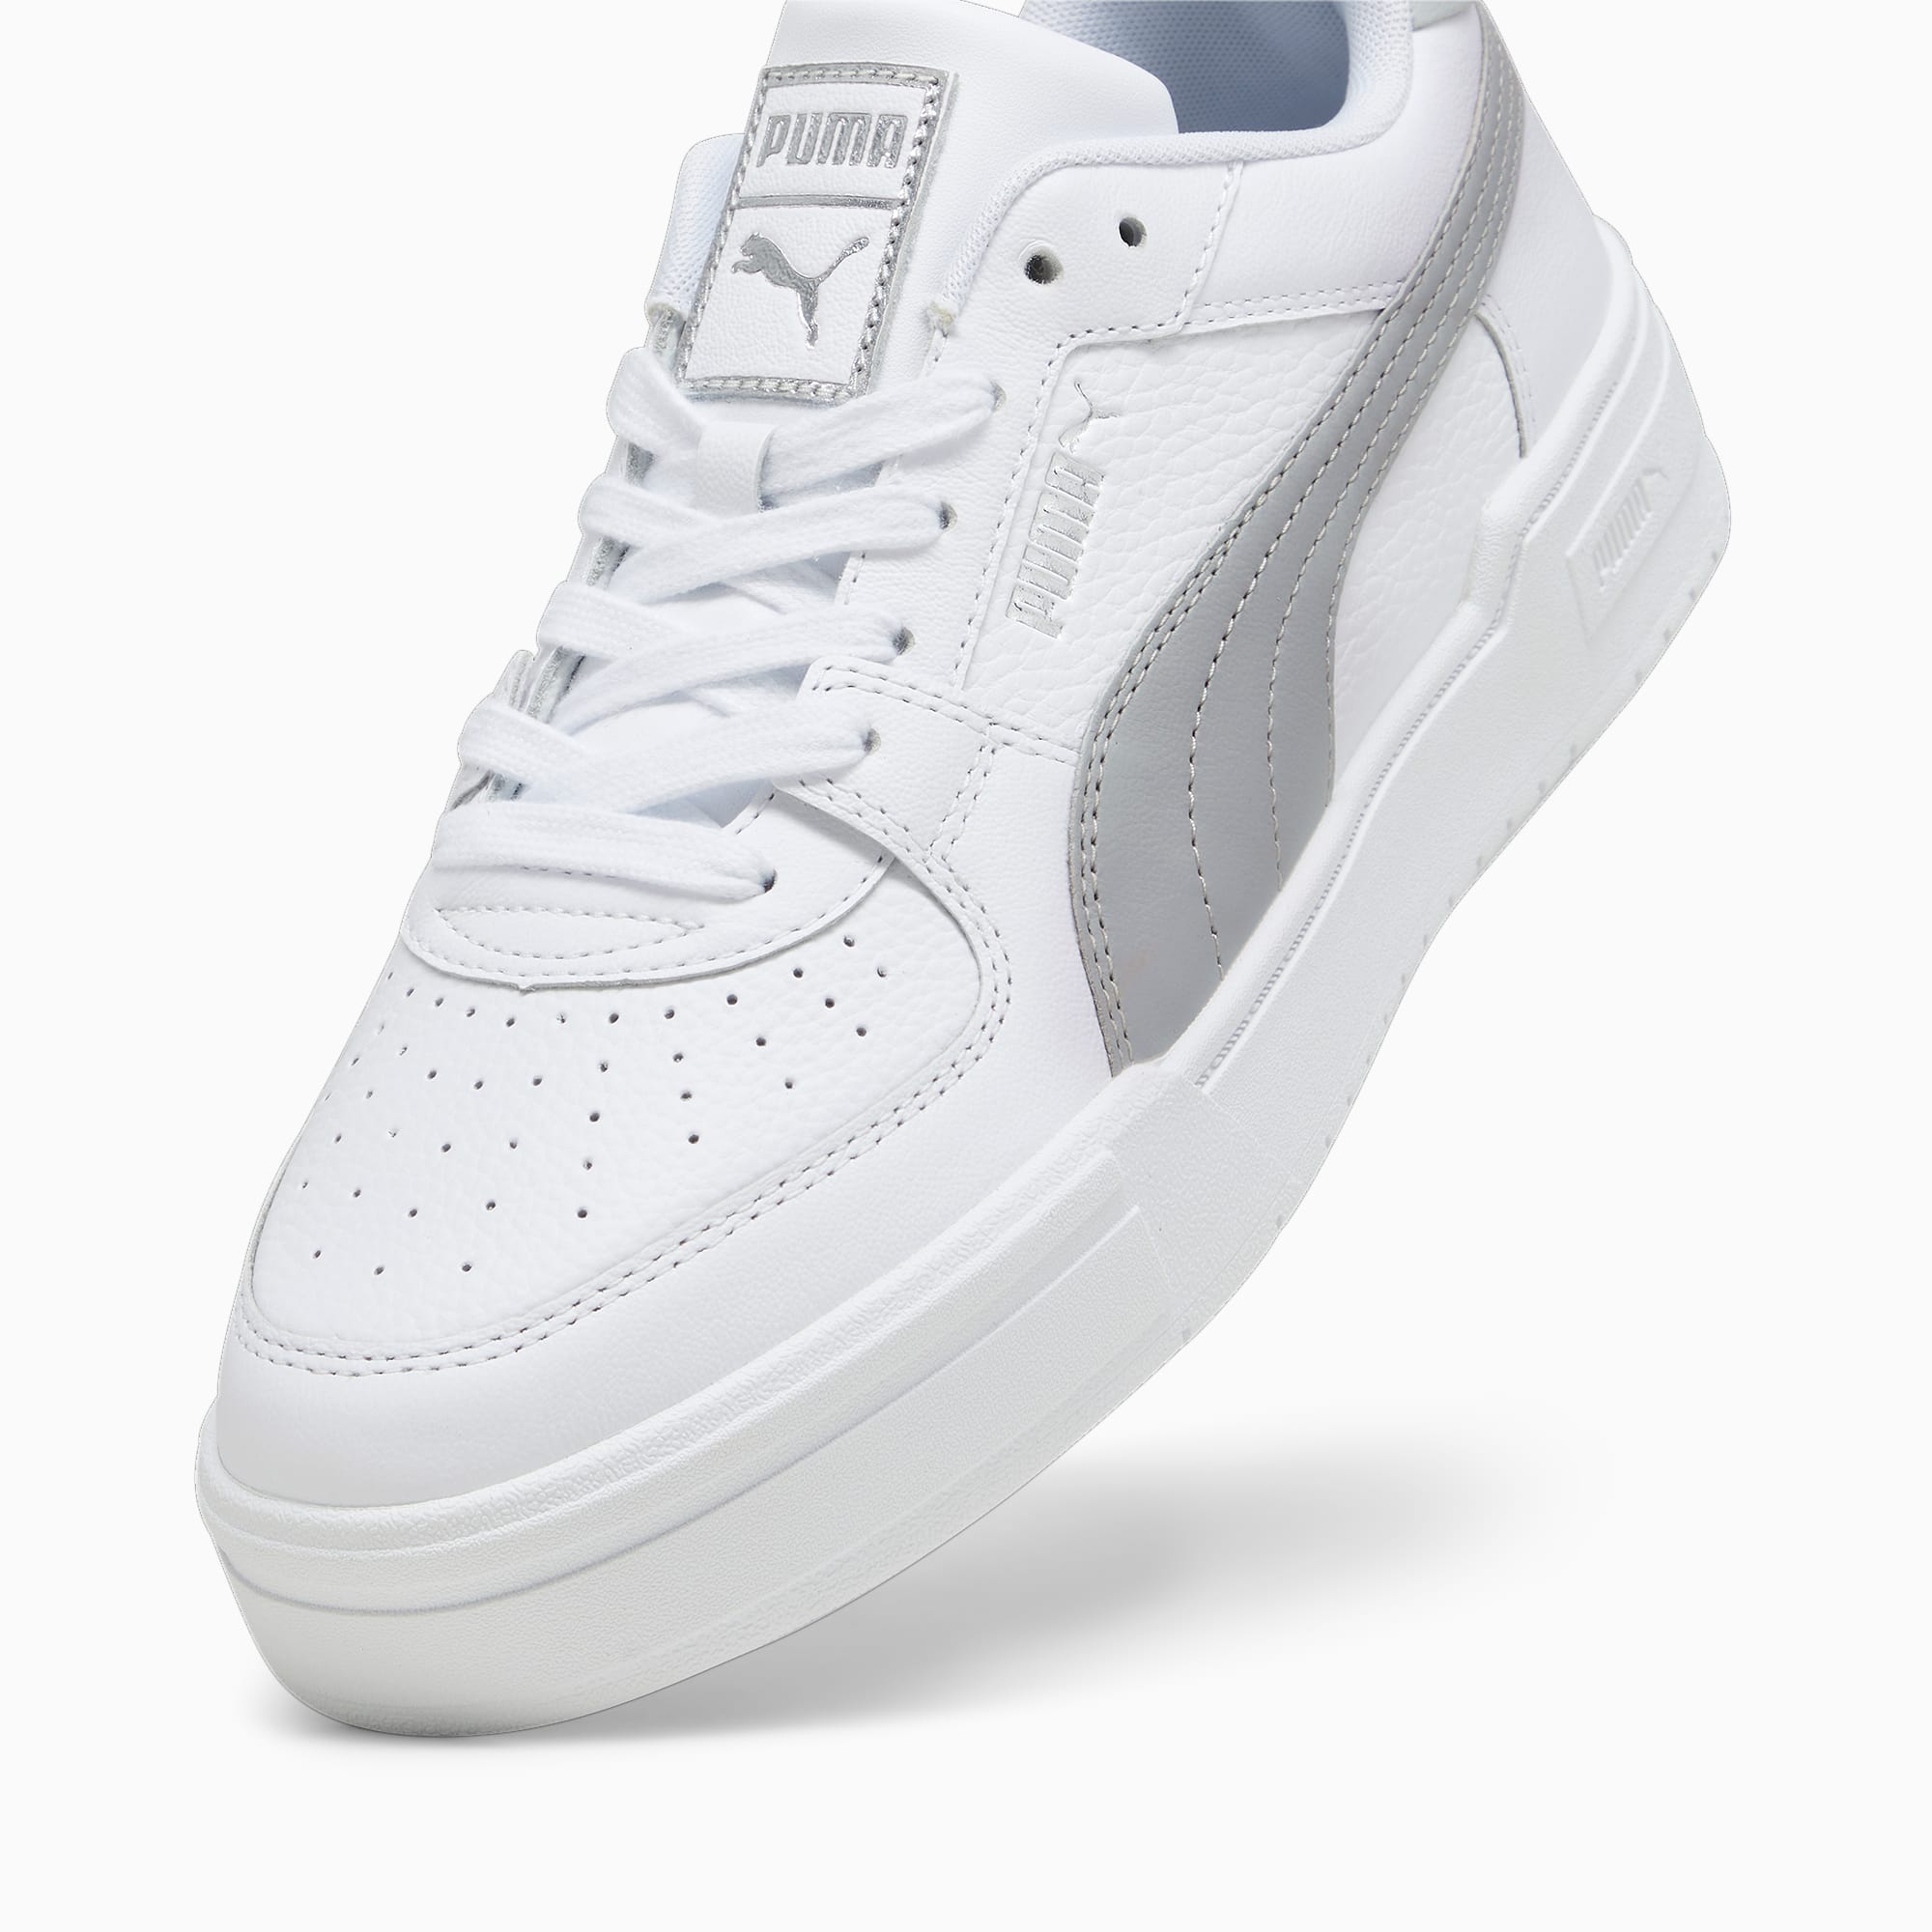 Women's PUMA Ca Pro Classic Trainers, White/Cool Light Grey, Size 45, Shoes